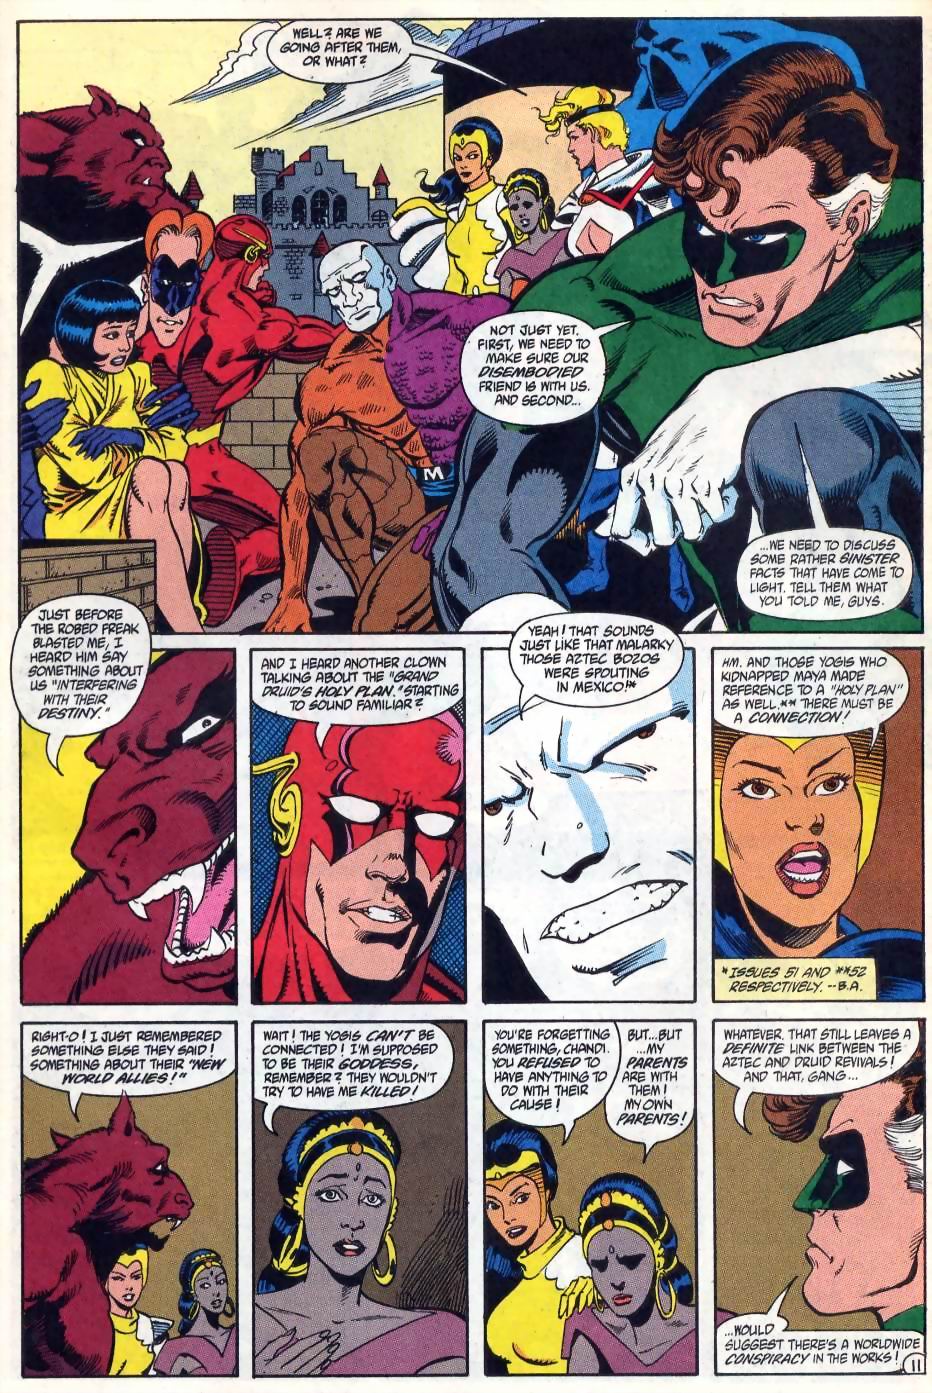 Justice League International (1993) 57 Page 11